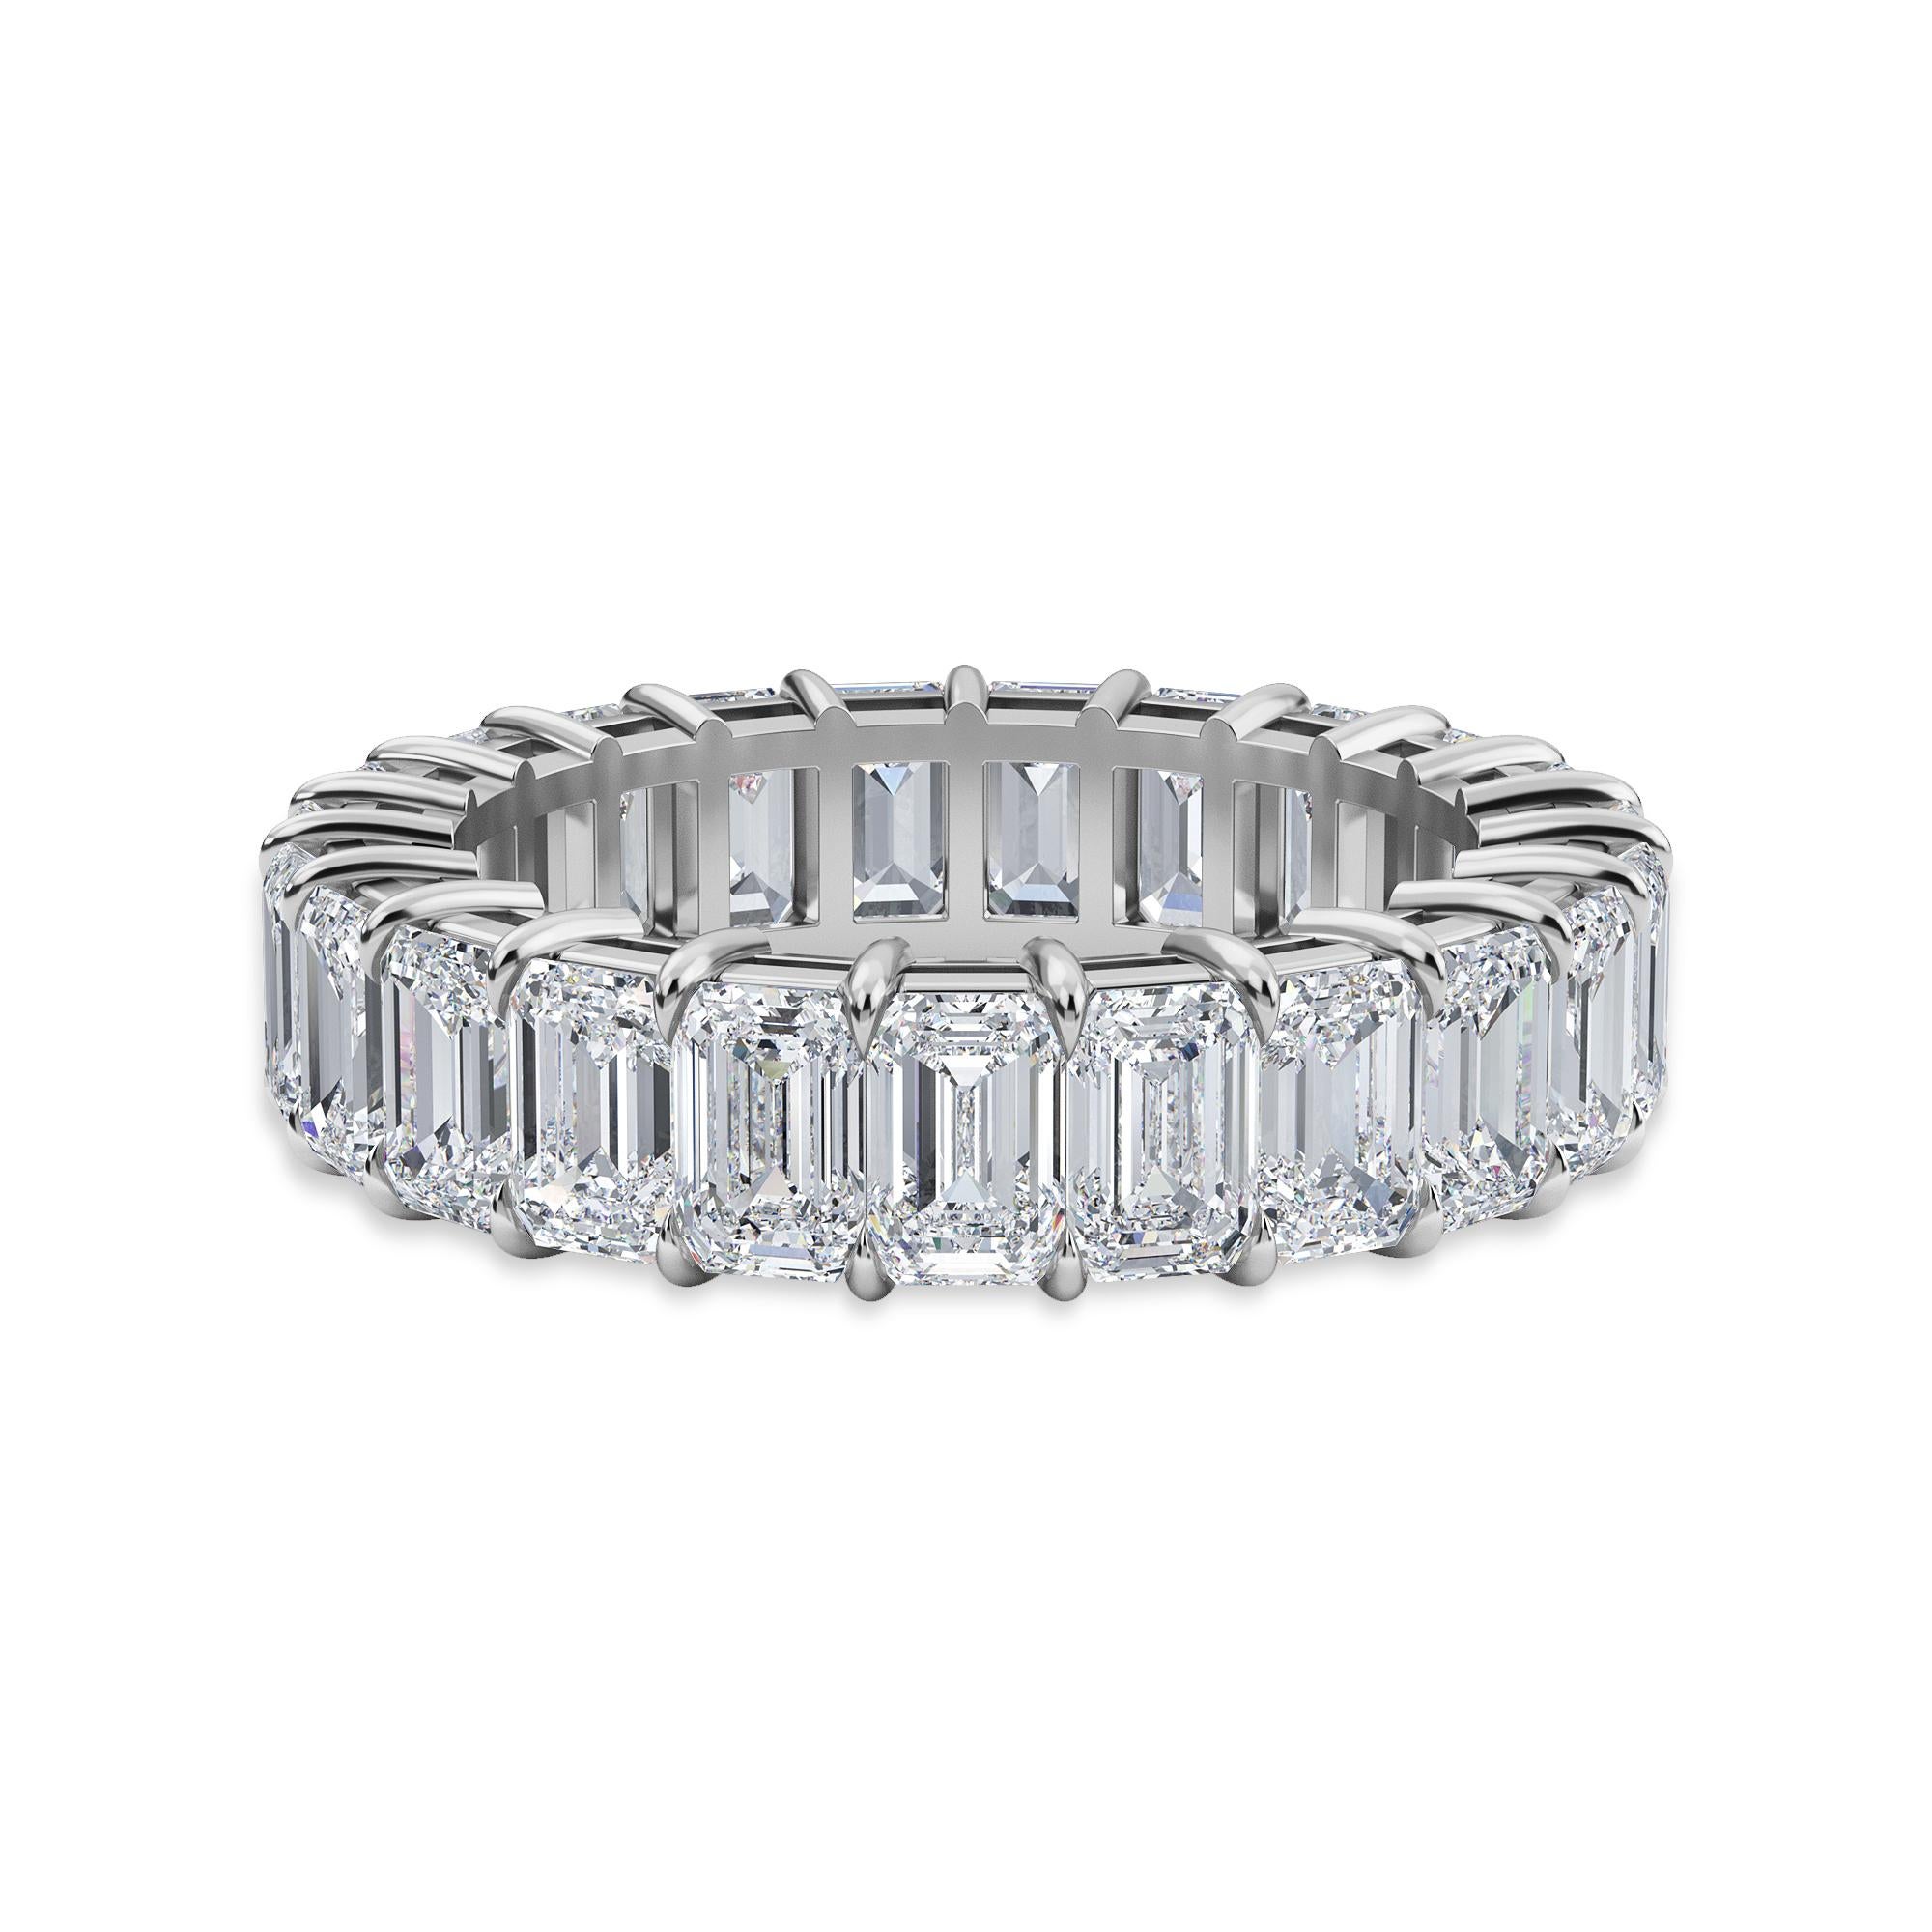 This Emerald Cut Diamond Eternity Band features 23 Diamonds and has a Total Carat Weight of 5.67.
The Diamonds are F Color, VS Clarity. The ring is a Finger Size 7 and is set in Platinum.